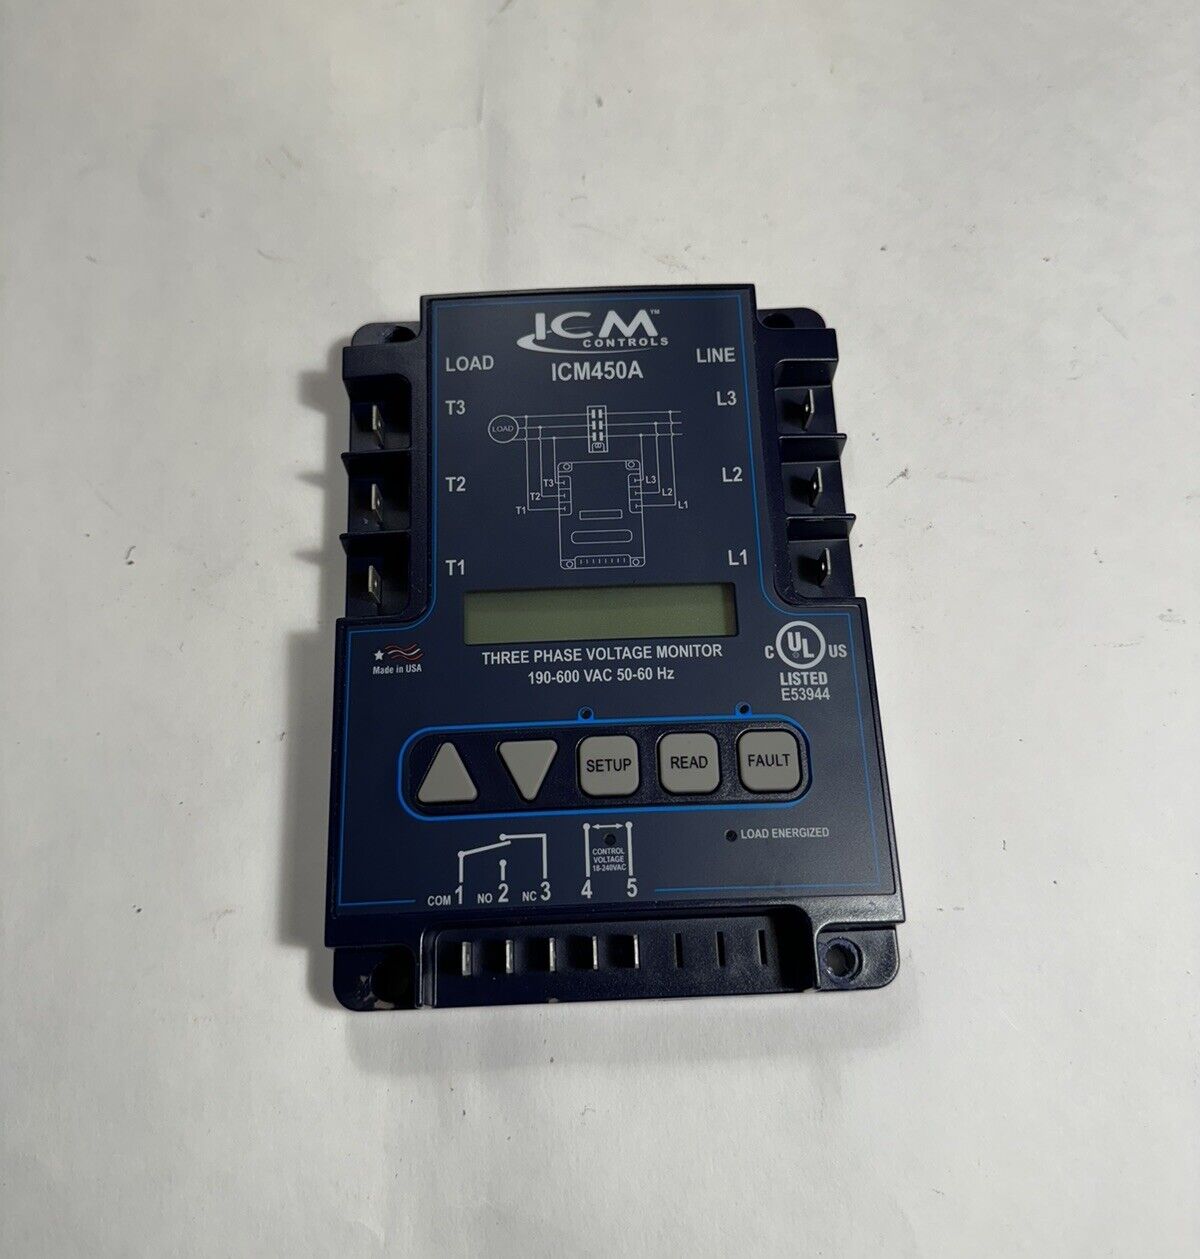 ICM Controls Programmable 3 Phase Line Voltage Monitor ICM450A Tested